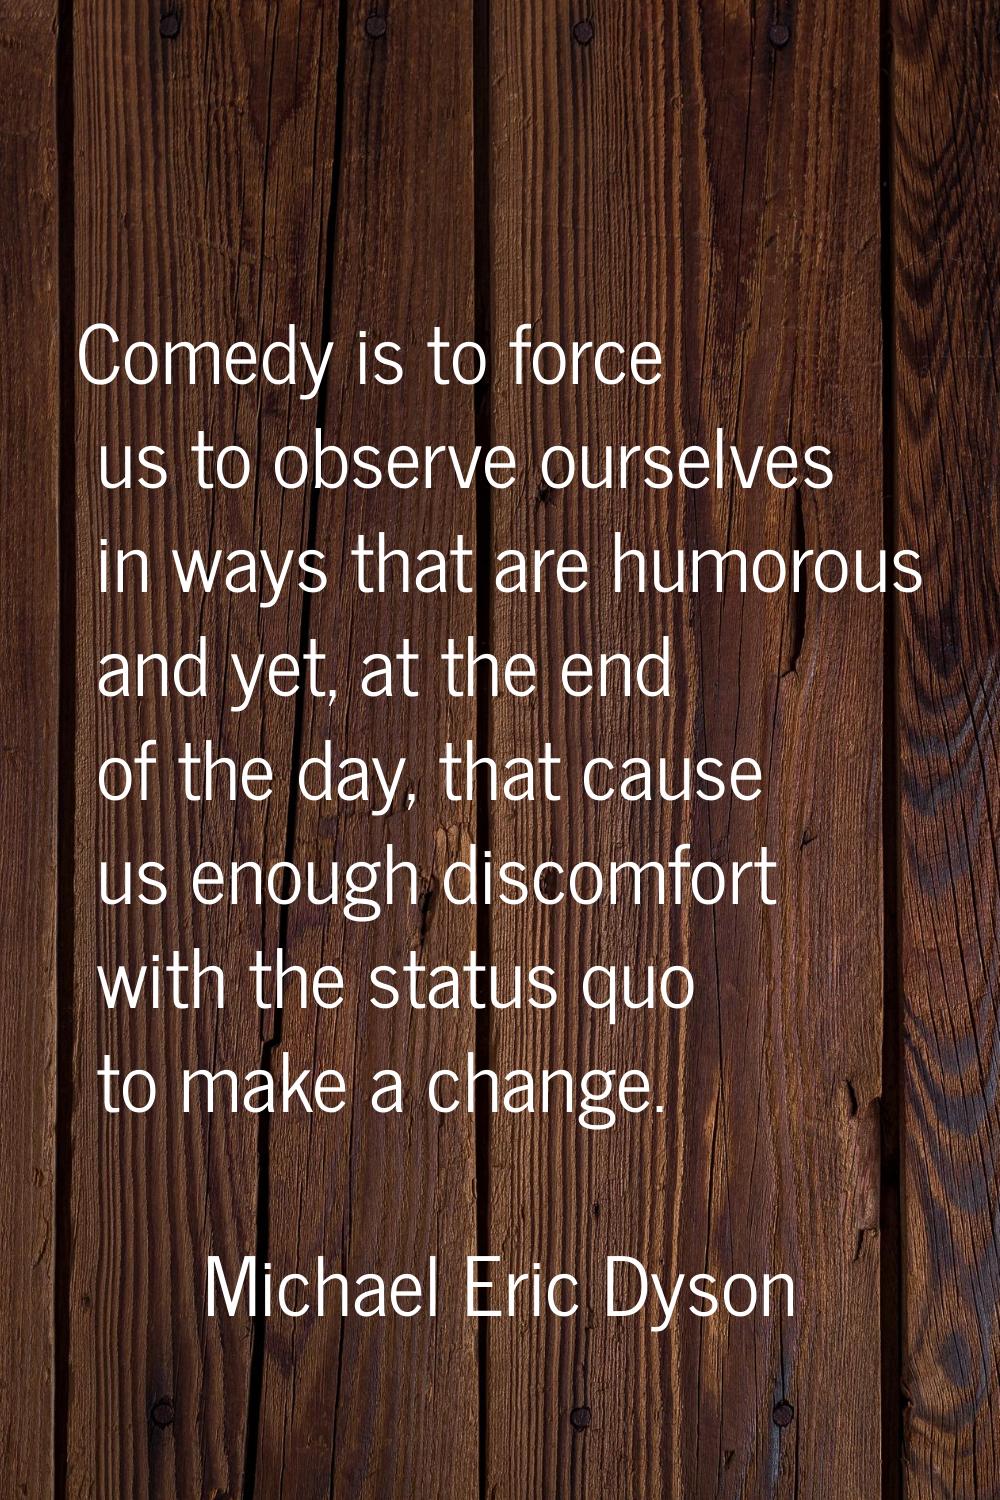 Comedy is to force us to observe ourselves in ways that are humorous and yet, at the end of the day